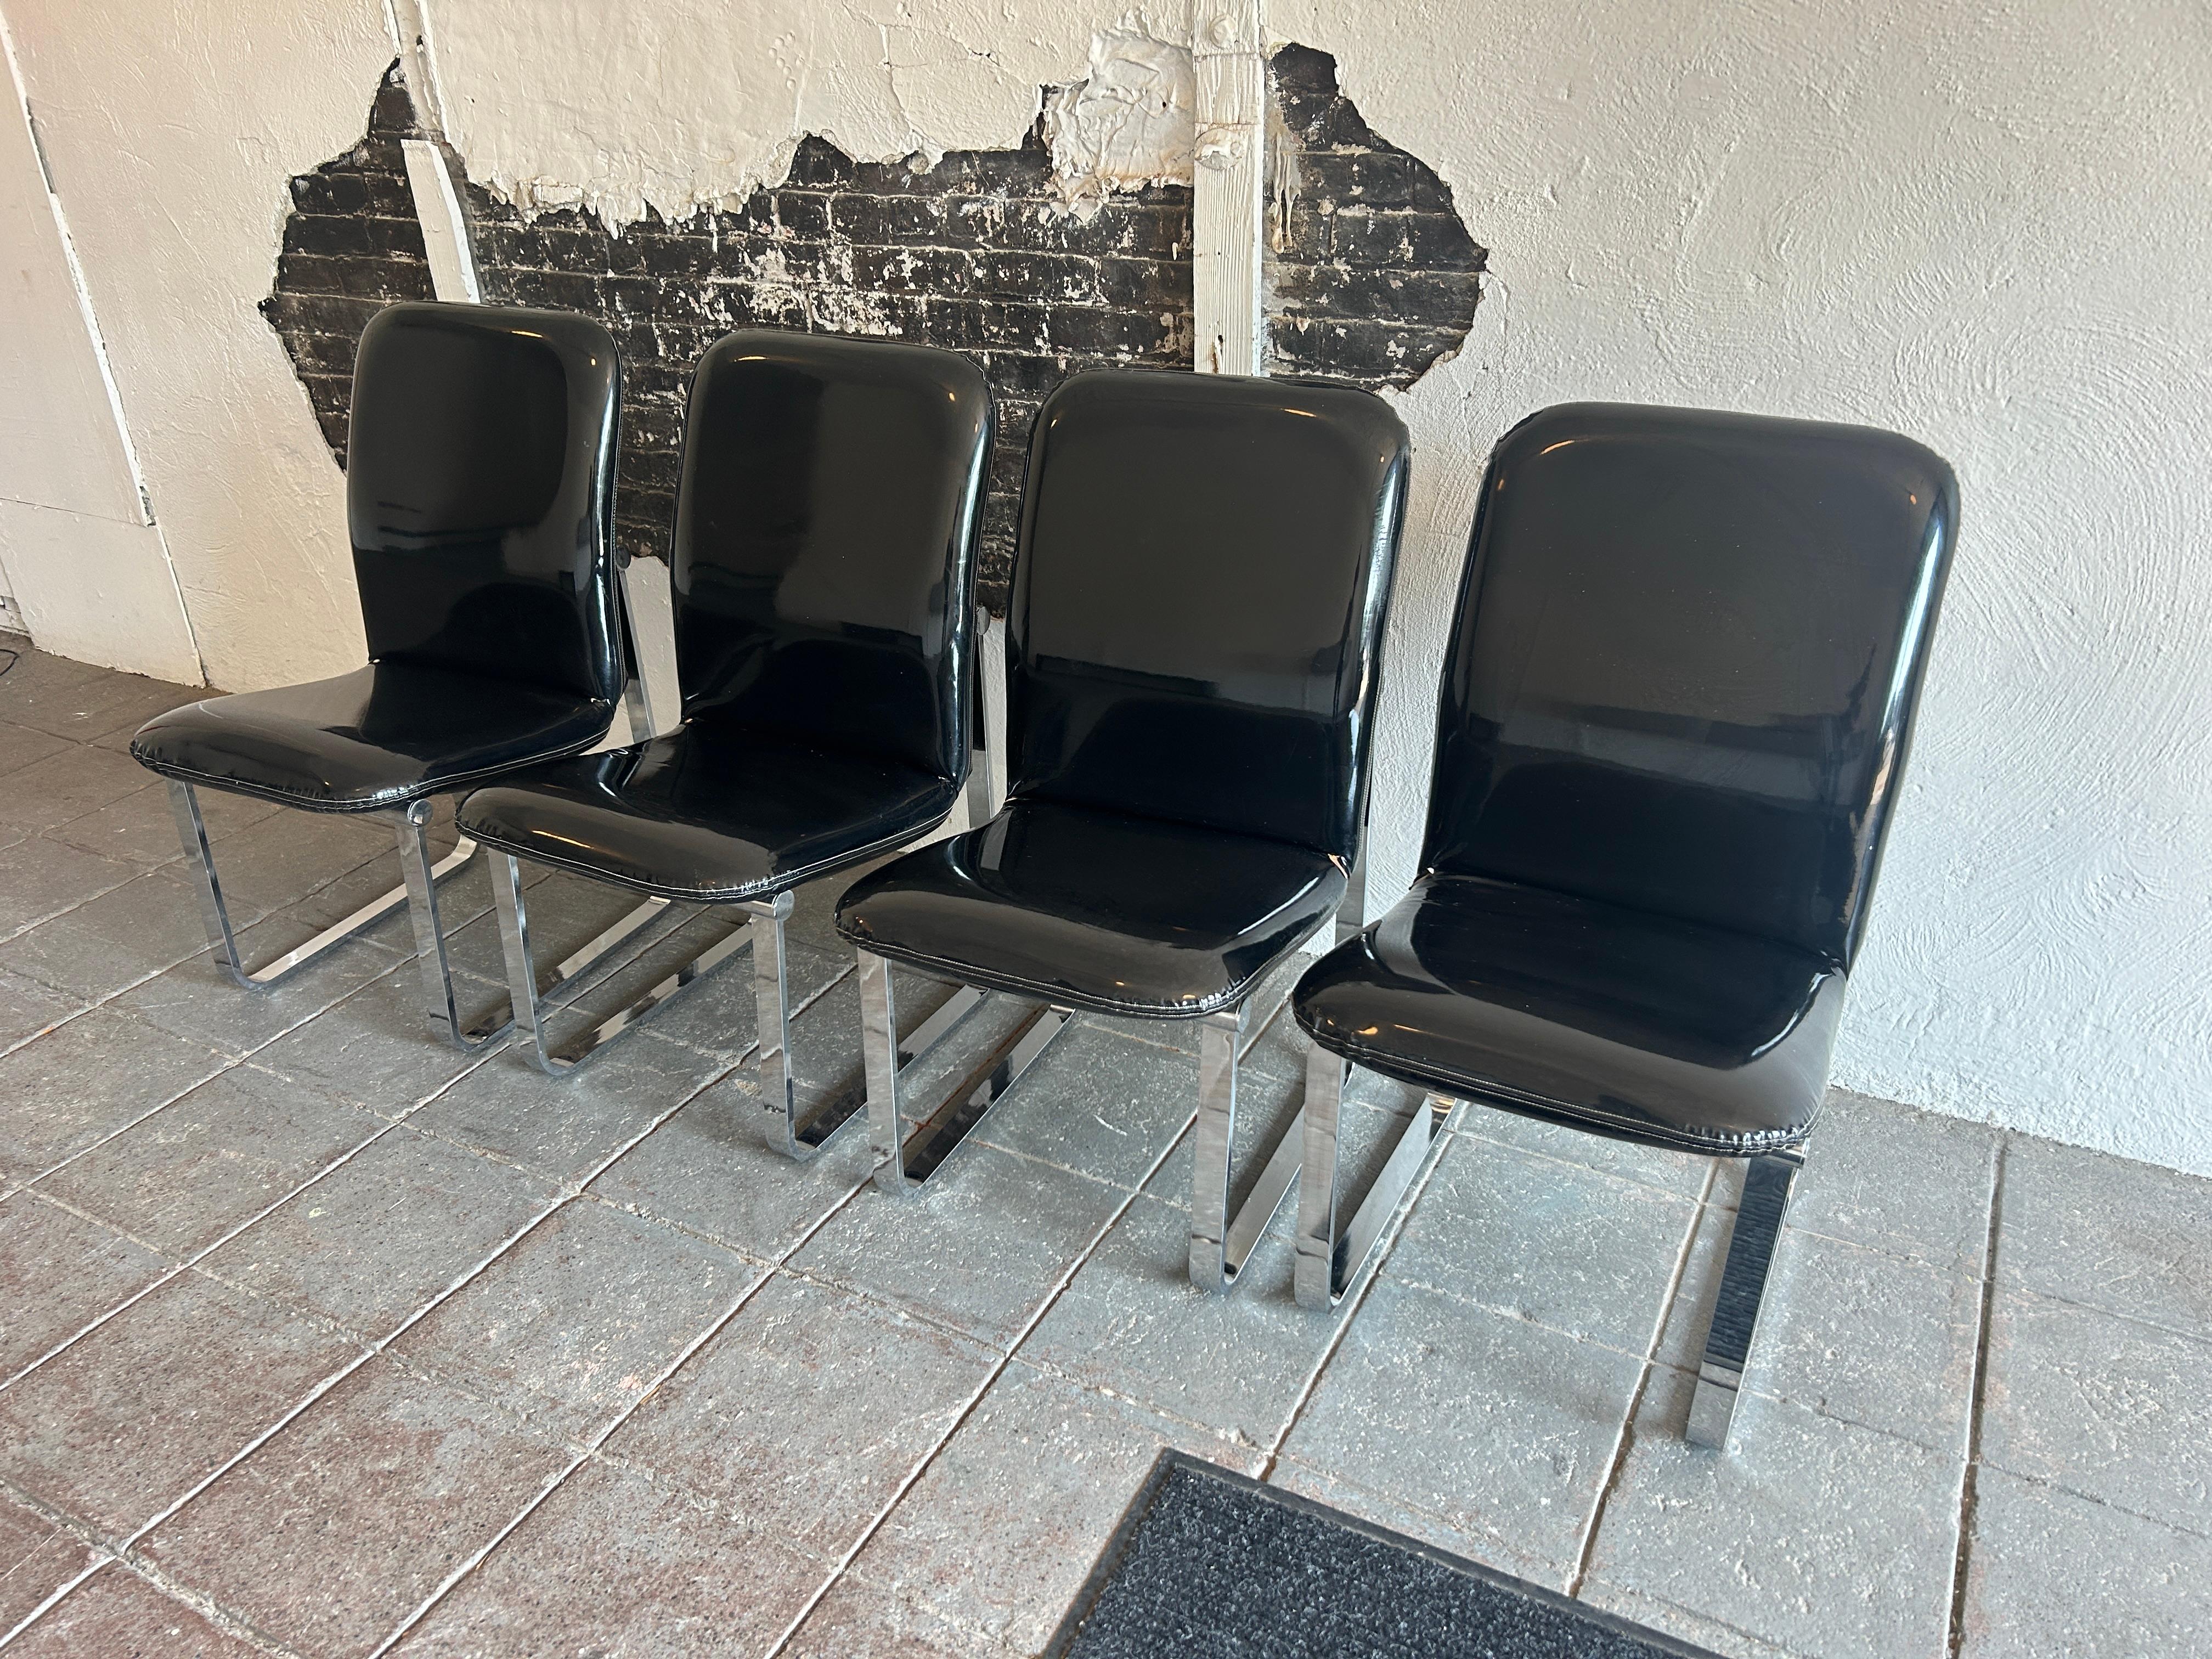 Set of (4) Mid century post modern Black Glossy faux Patent Leather chrome cane dining chairs by DIA. Great set of 1980's Post Modern chairs. Super high Glossy Black upholstery with solid steel chrome plated bases. All (4) chairs are in very good